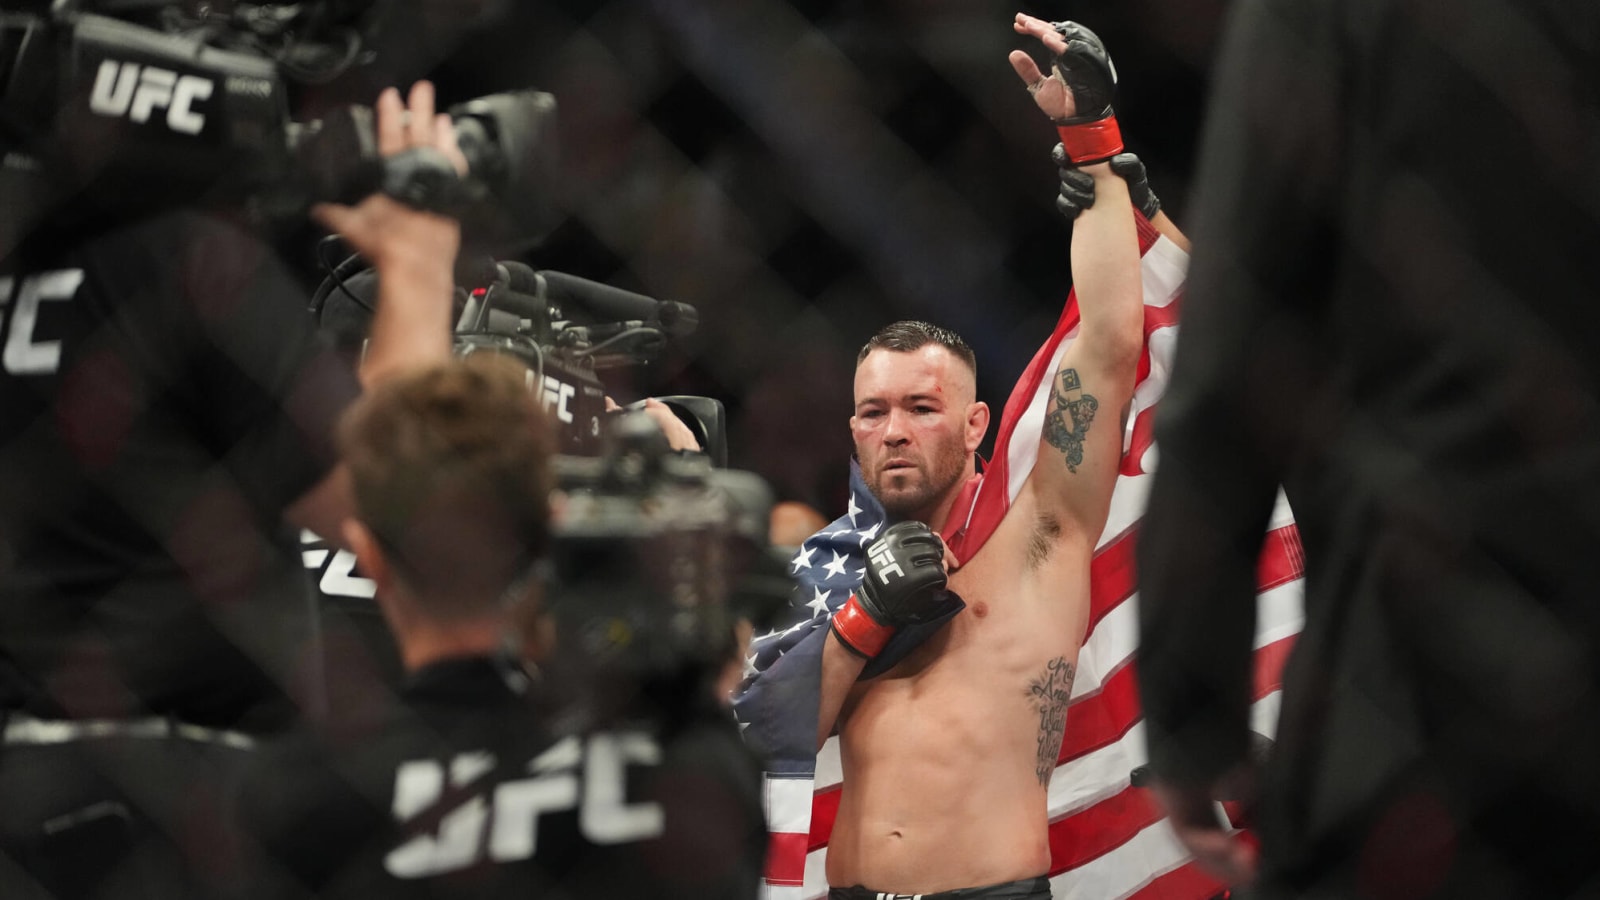 Colby Covington calls for fight with Conor McGregor